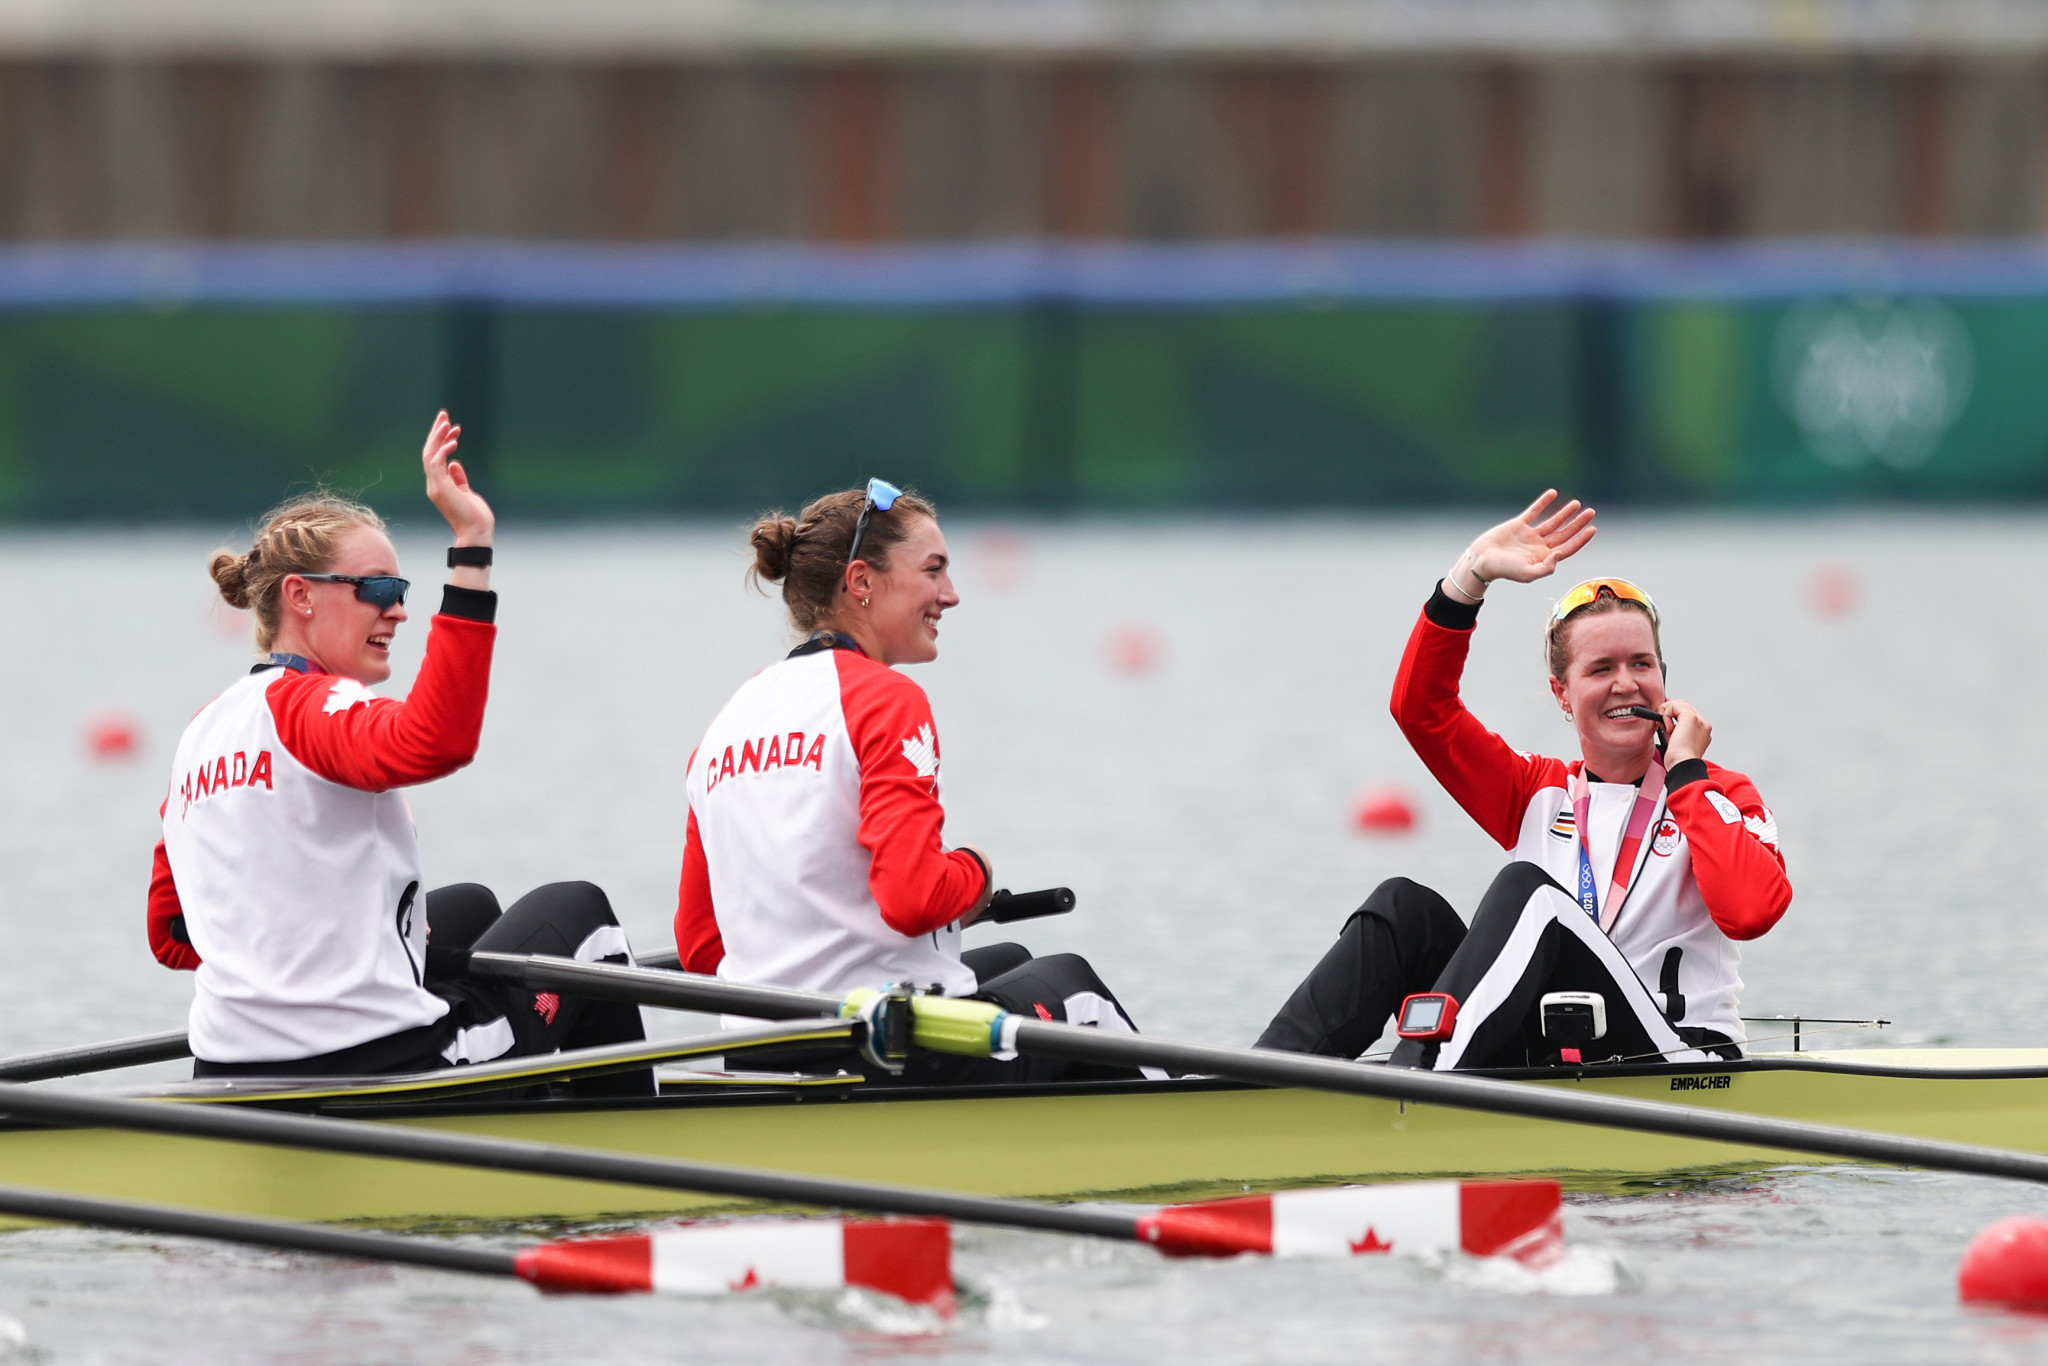 Olympic champions Payne and Wasteneys seek to replicate success at World Rowing Cup in Poznan